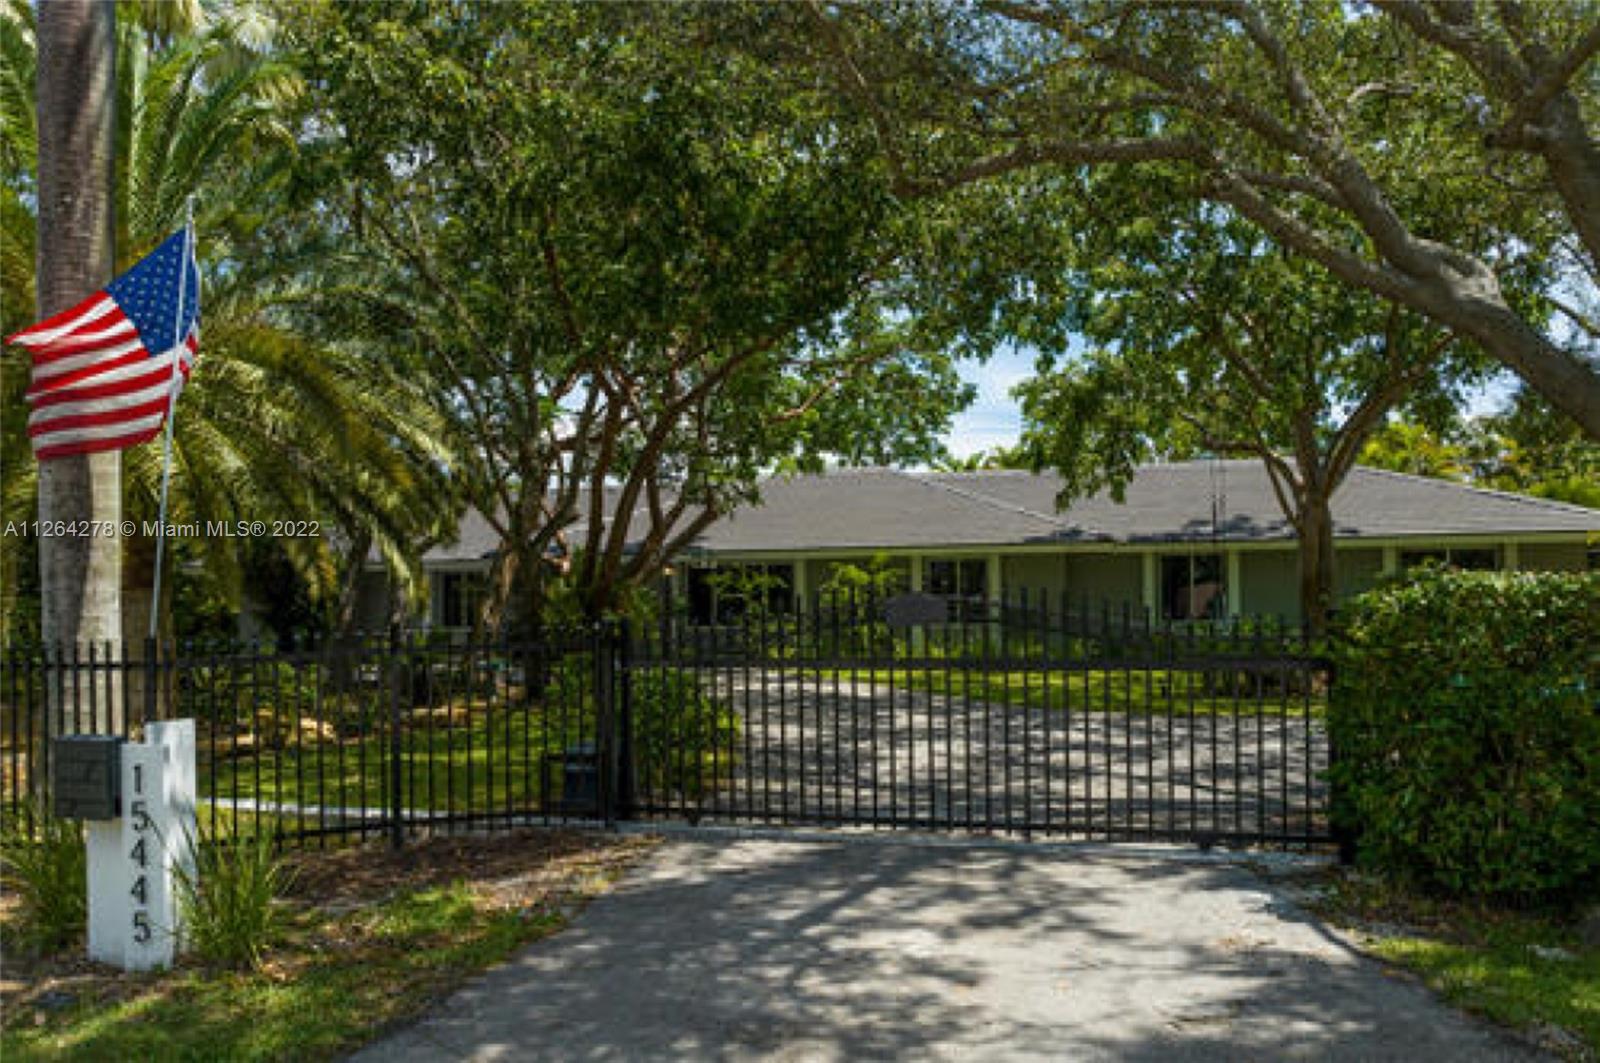 Completely remodeled by Unique Surfaces 
 in 2020. New roof in 2020. Hurricane impact windows and doors. No cast iron pipes. Mature fruit bearing and native trees throughout  the large fenced yard. Avocado, mango, carambola, banana, sapodilla, loquat, and others.  Electric gate entry. Outdoor landscape lighting. Newly resurfaced diamond brite pool. Two screened patios. Covered parking.  RV power. Nestled in an enjoyable neighborhood, and minutes from local attractions, public park. Great area schools.